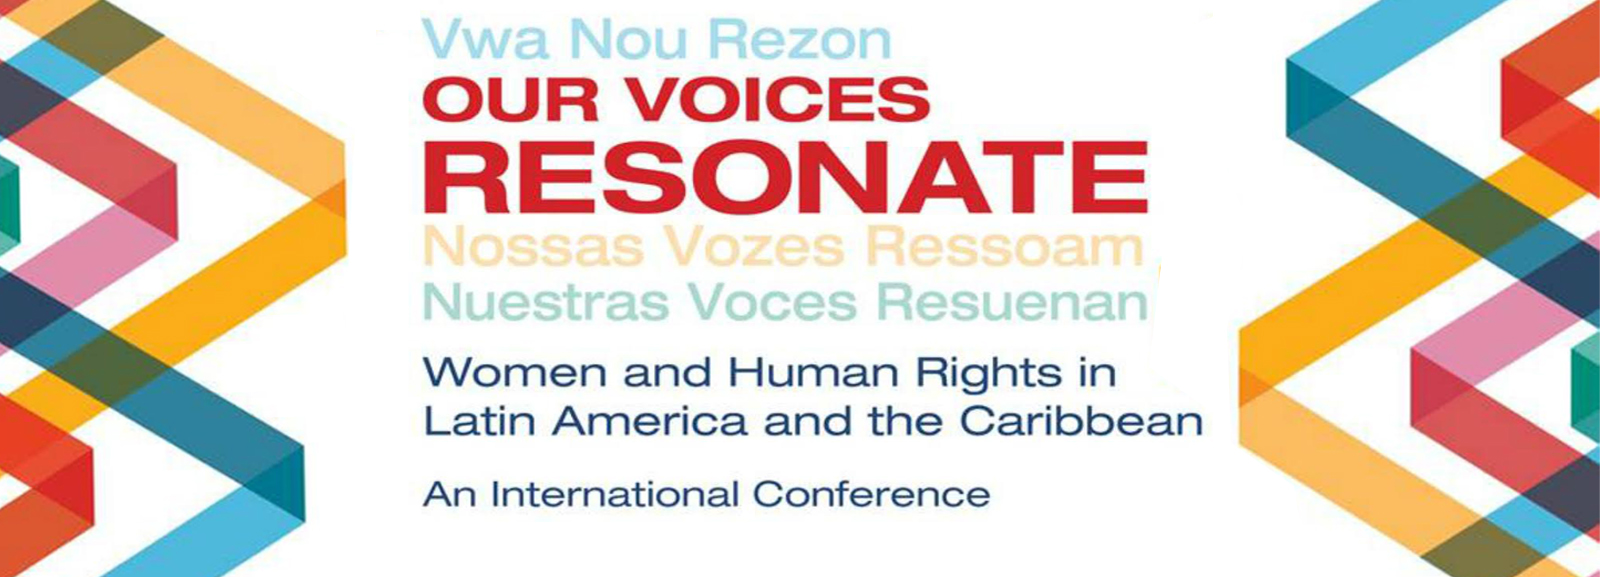 Registration now open for inaugural women’s conference: Our Voices Resonate